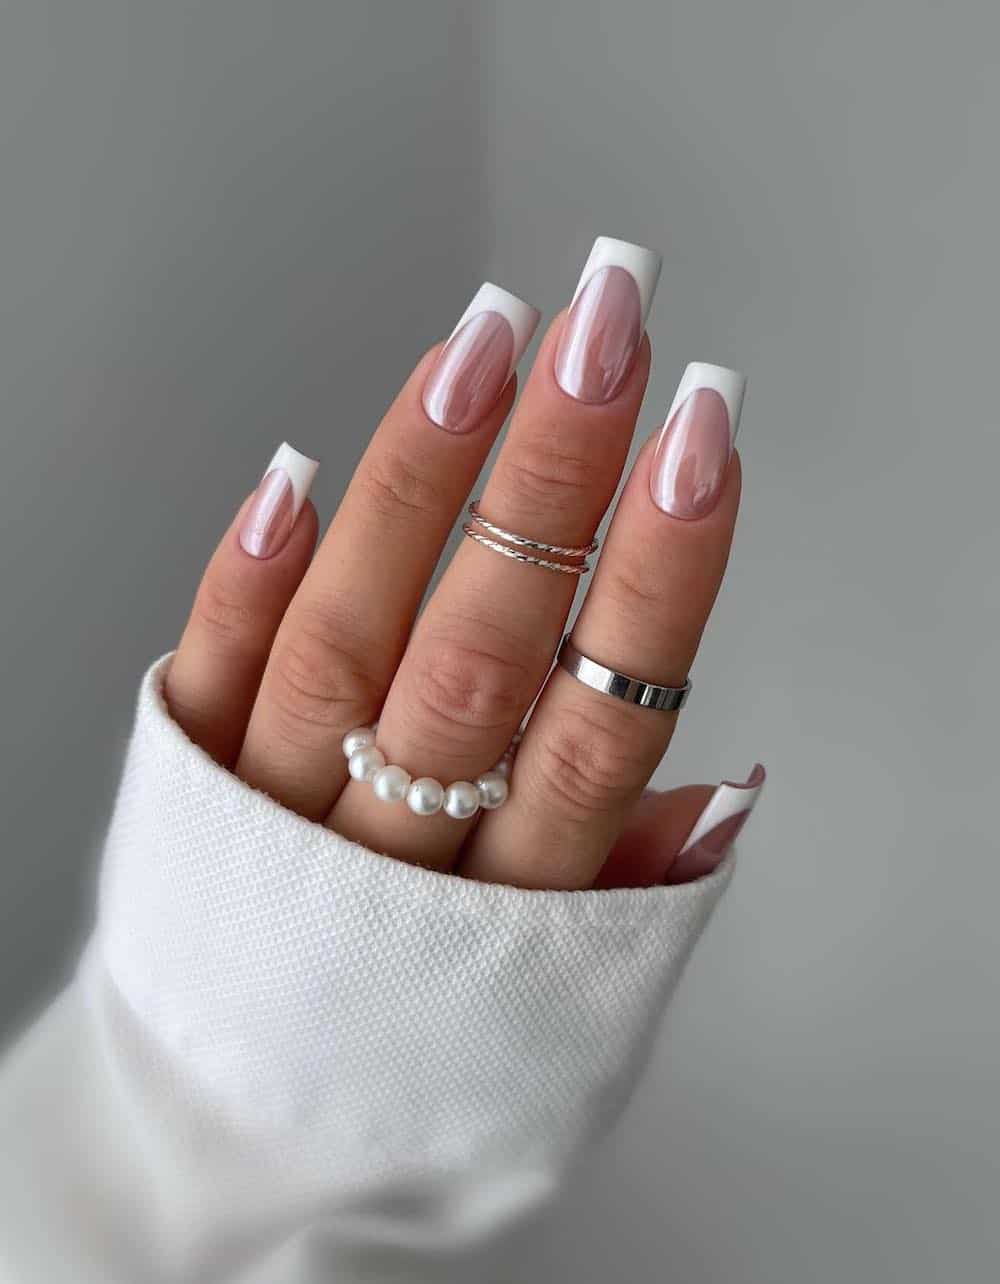 A hand with medium-length square nails painted with classic white French tips and a chrome finish